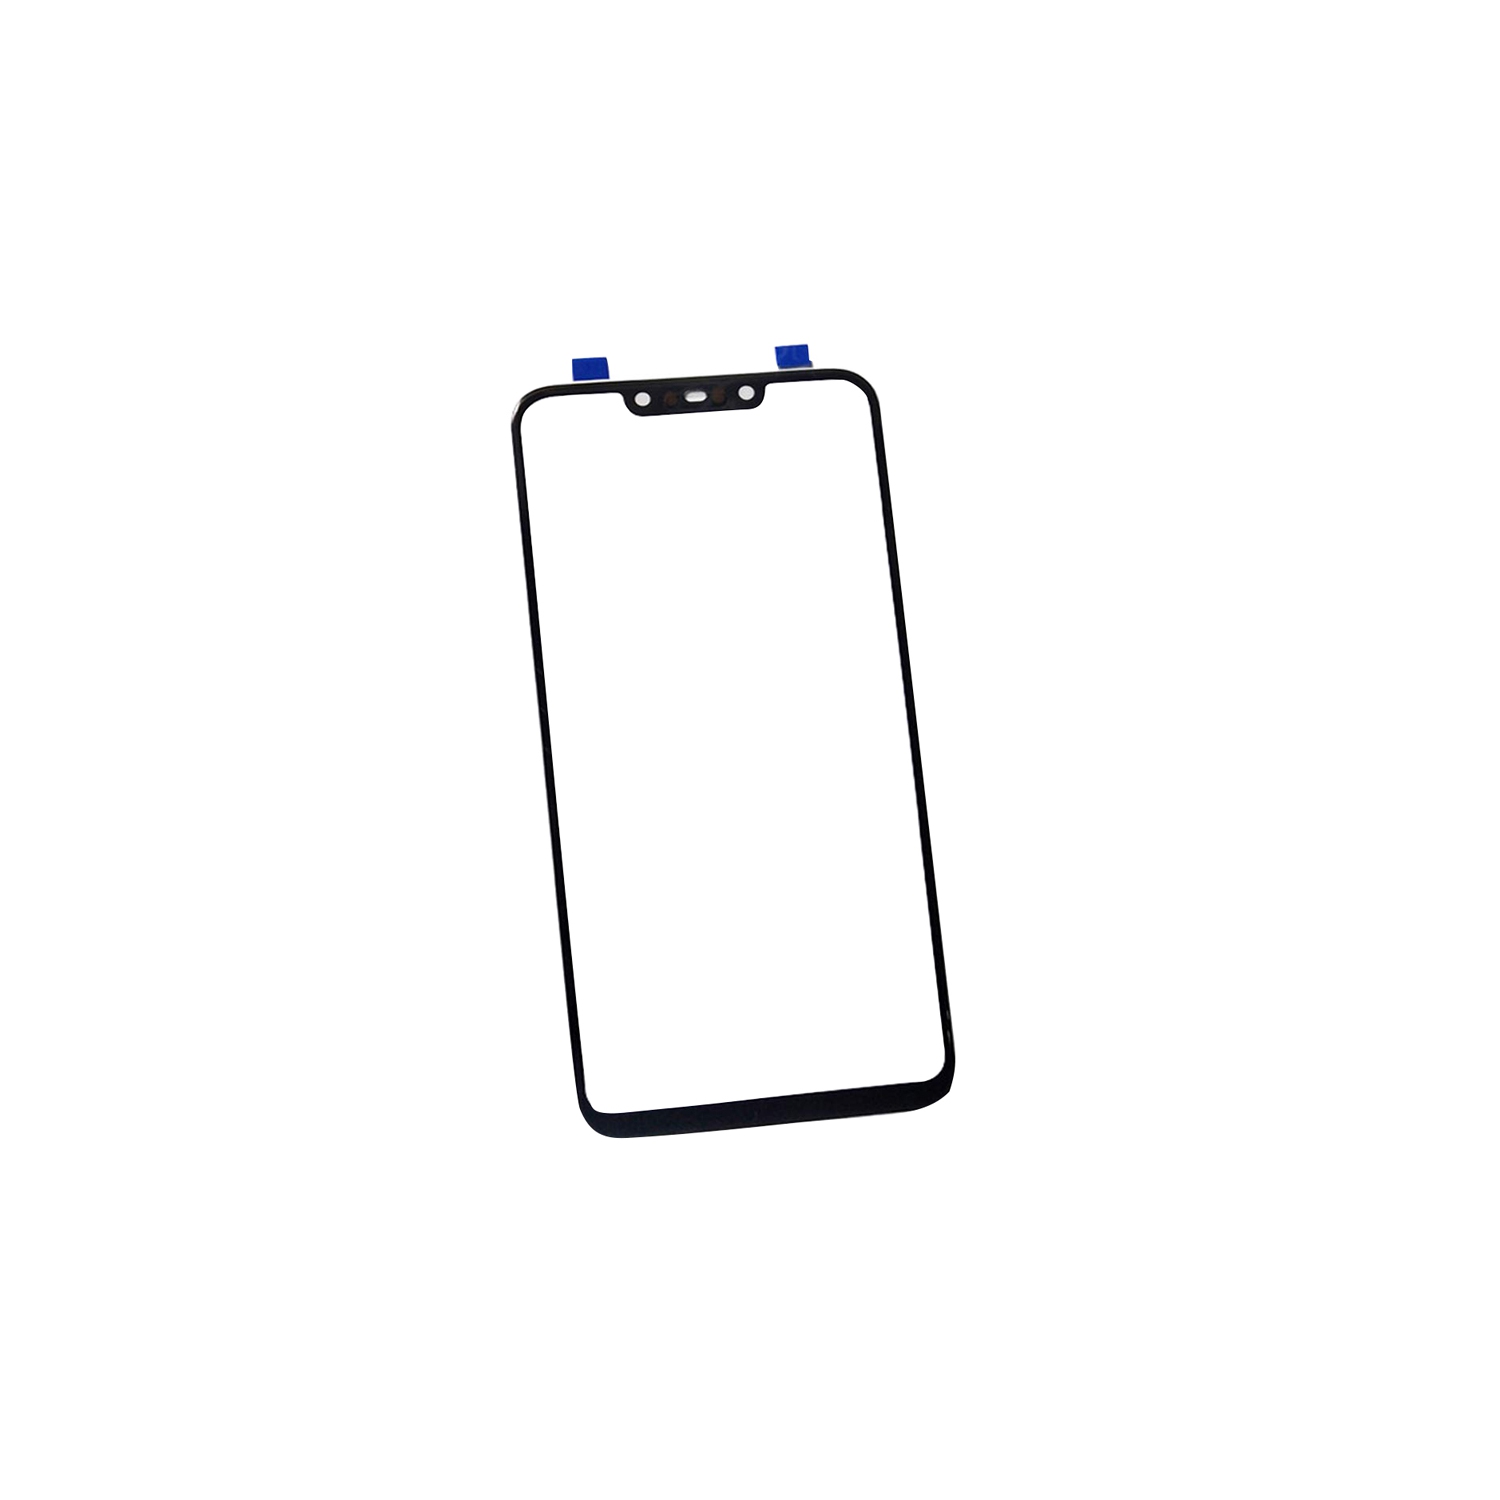 Replacement Front Top Glass Outer Screen Glass Lens Compatible With Huawei Mate 20 Lite